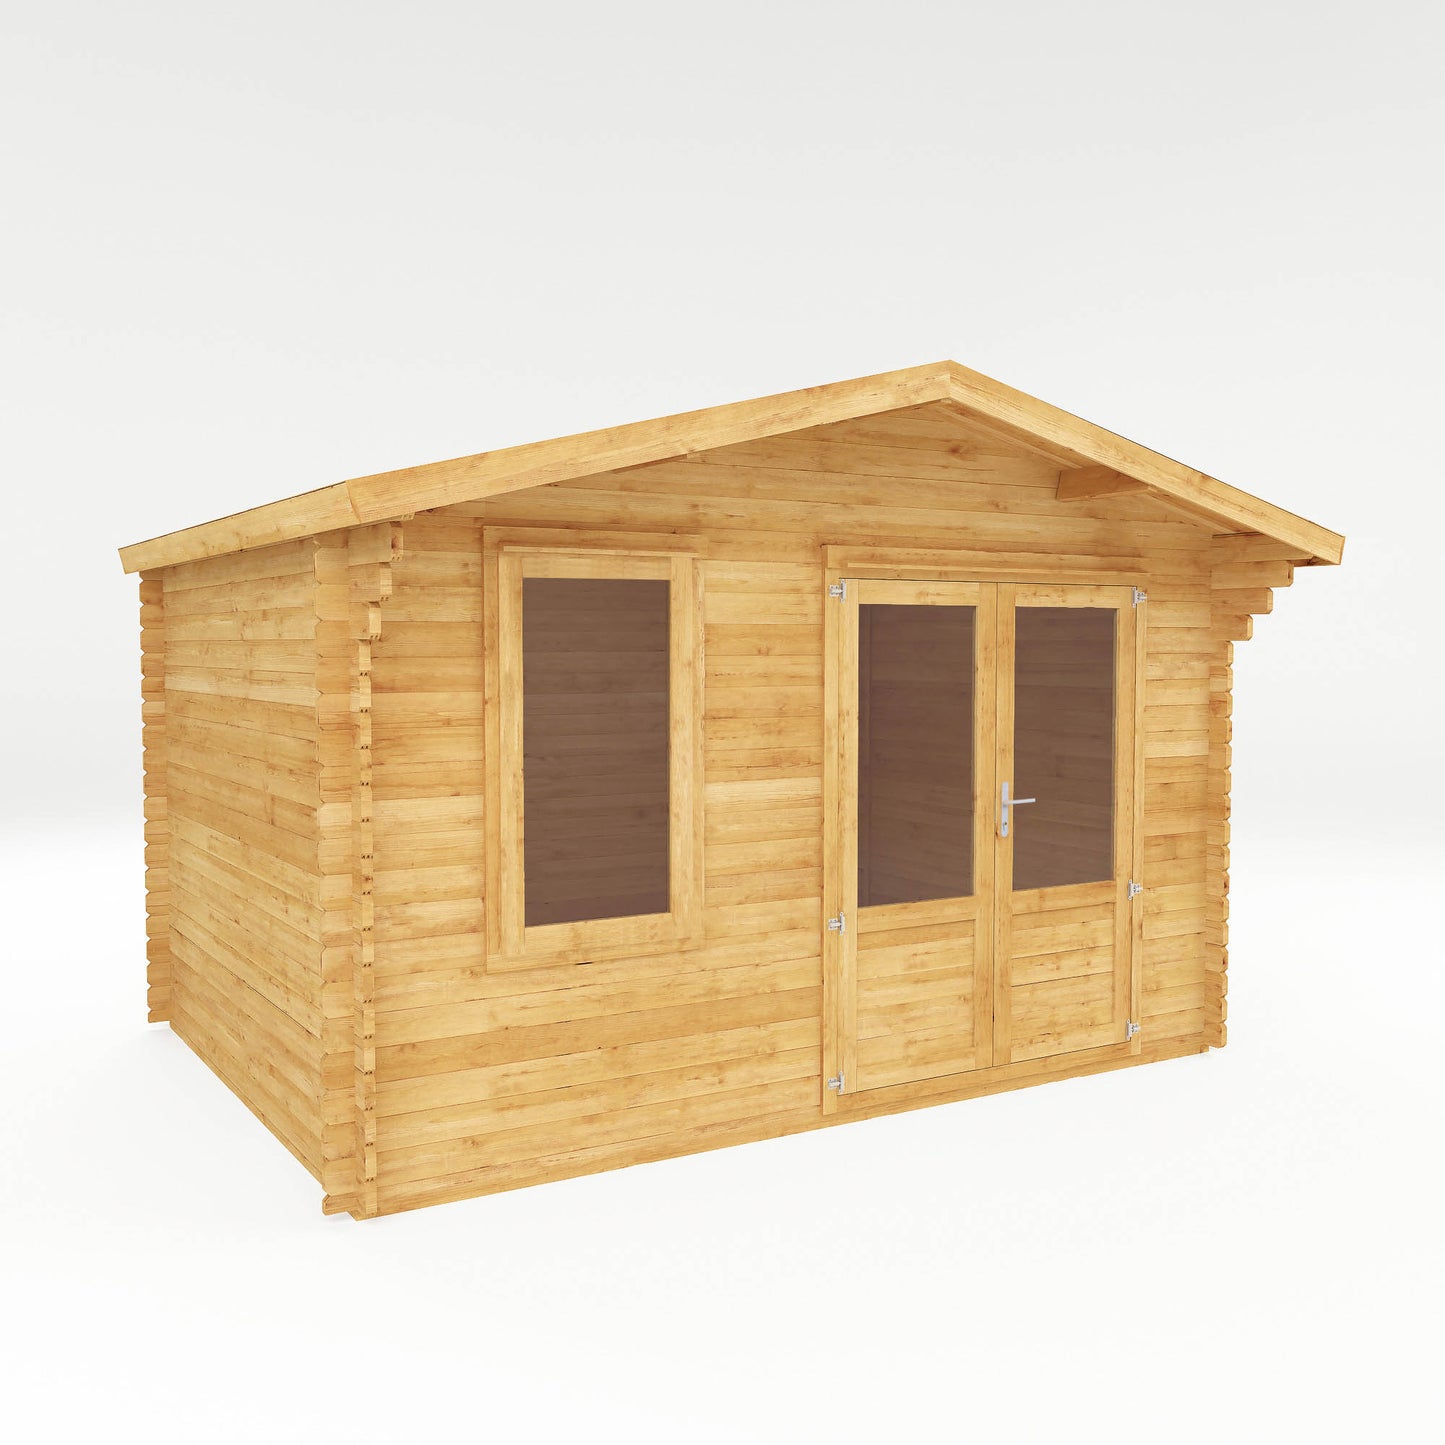 The 4m x 3m Sparrow Log Cabin